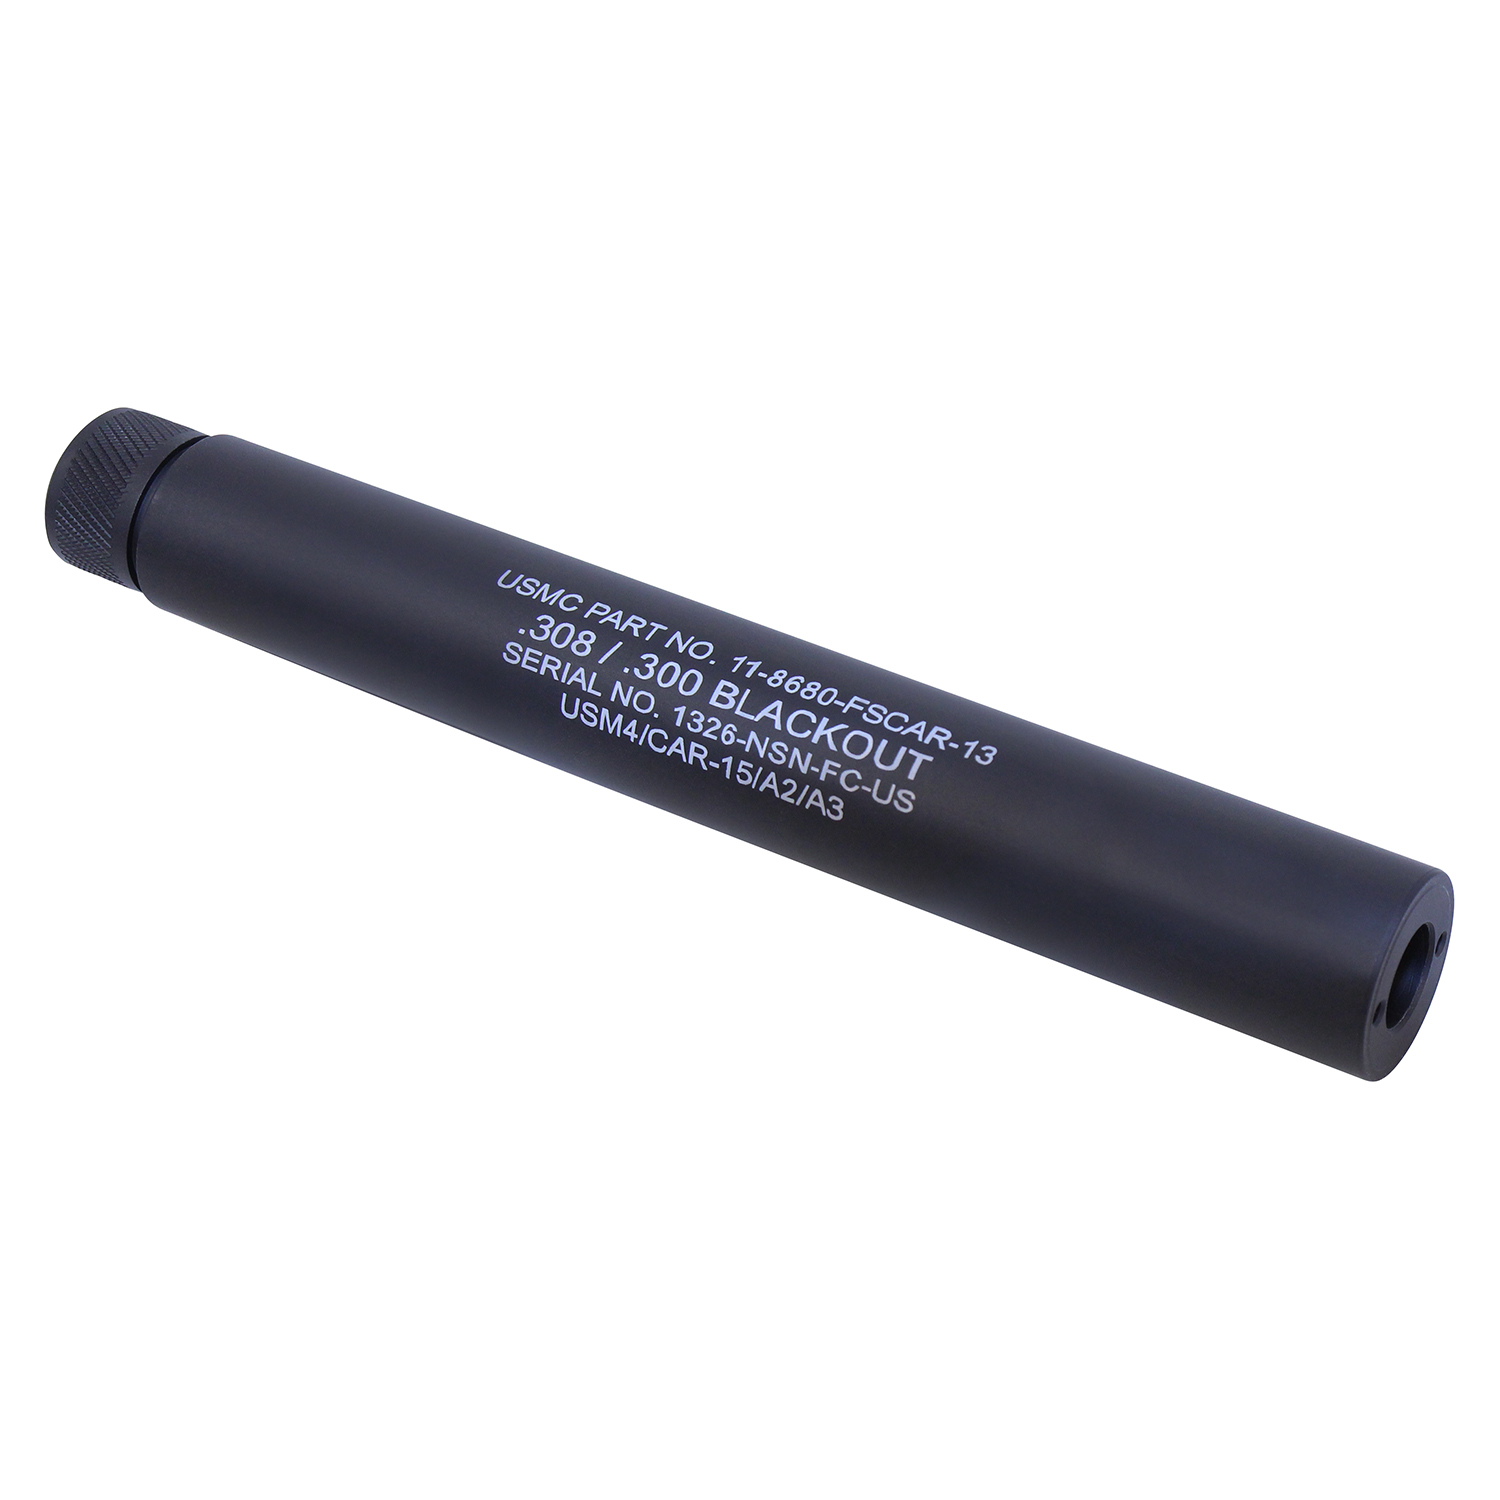 AR .308 Cal 9-inch fake suppressor, anodized black, with laser engravings